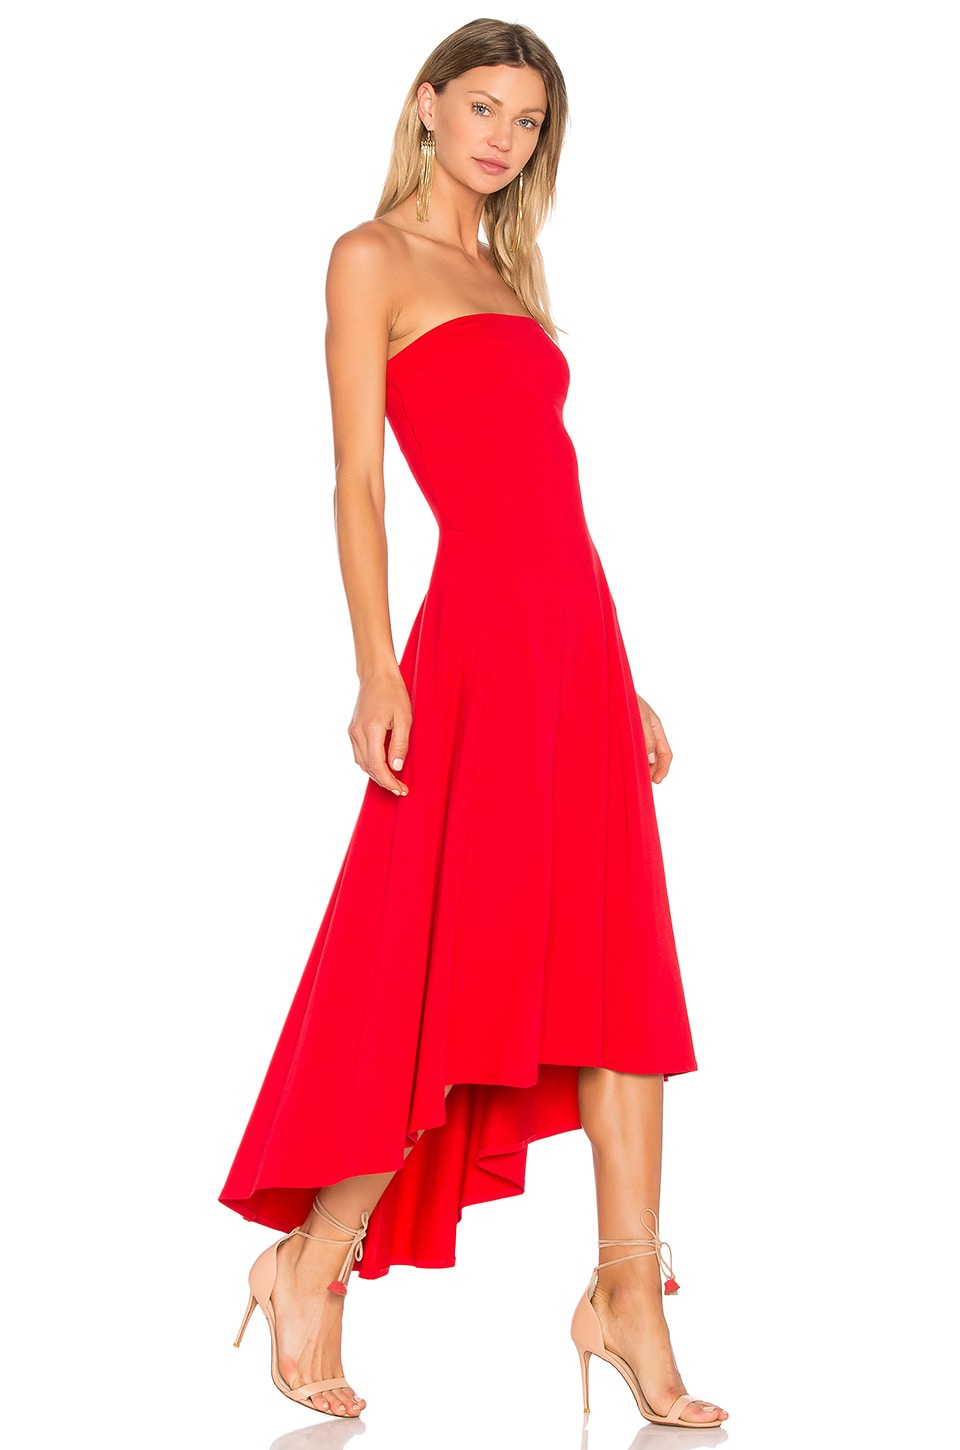 Susana Monaco Strapless Hi Low Dress in Perfect Red SIZE X-SMALL